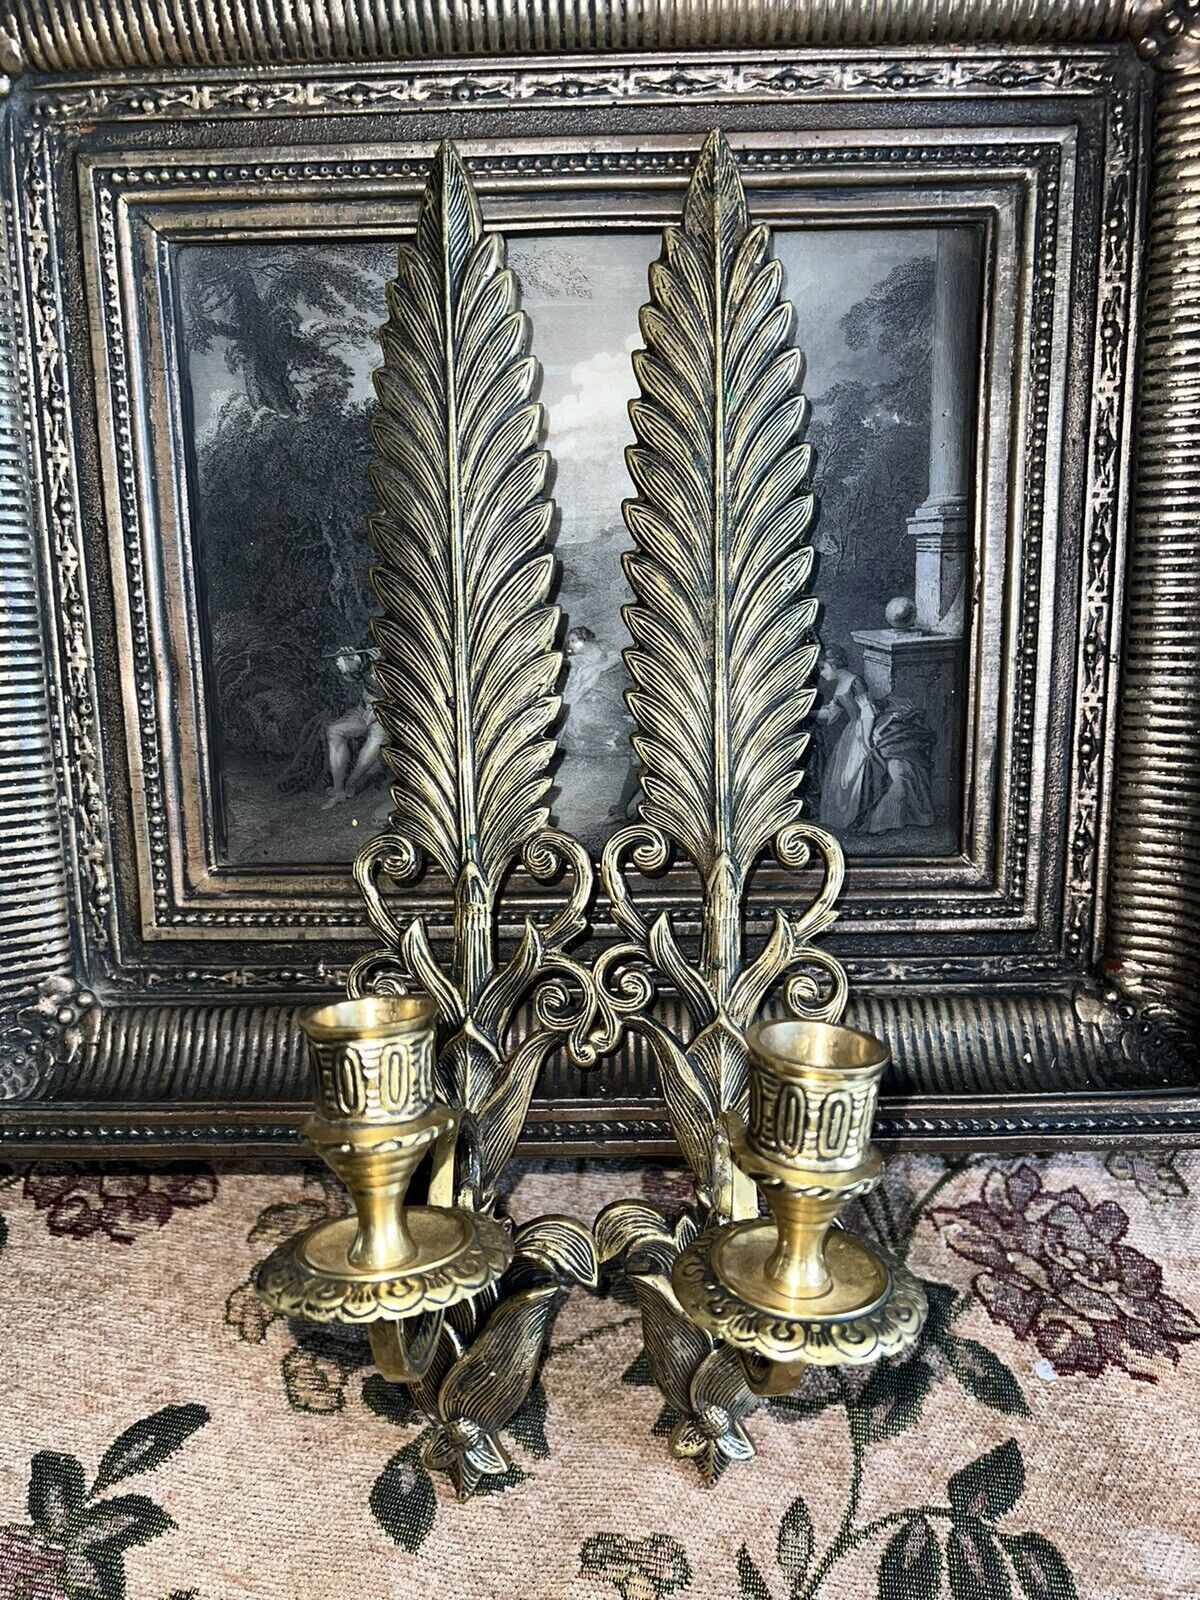 Solid brass Feather shaped wall sconce candle holder set of 2 made in India